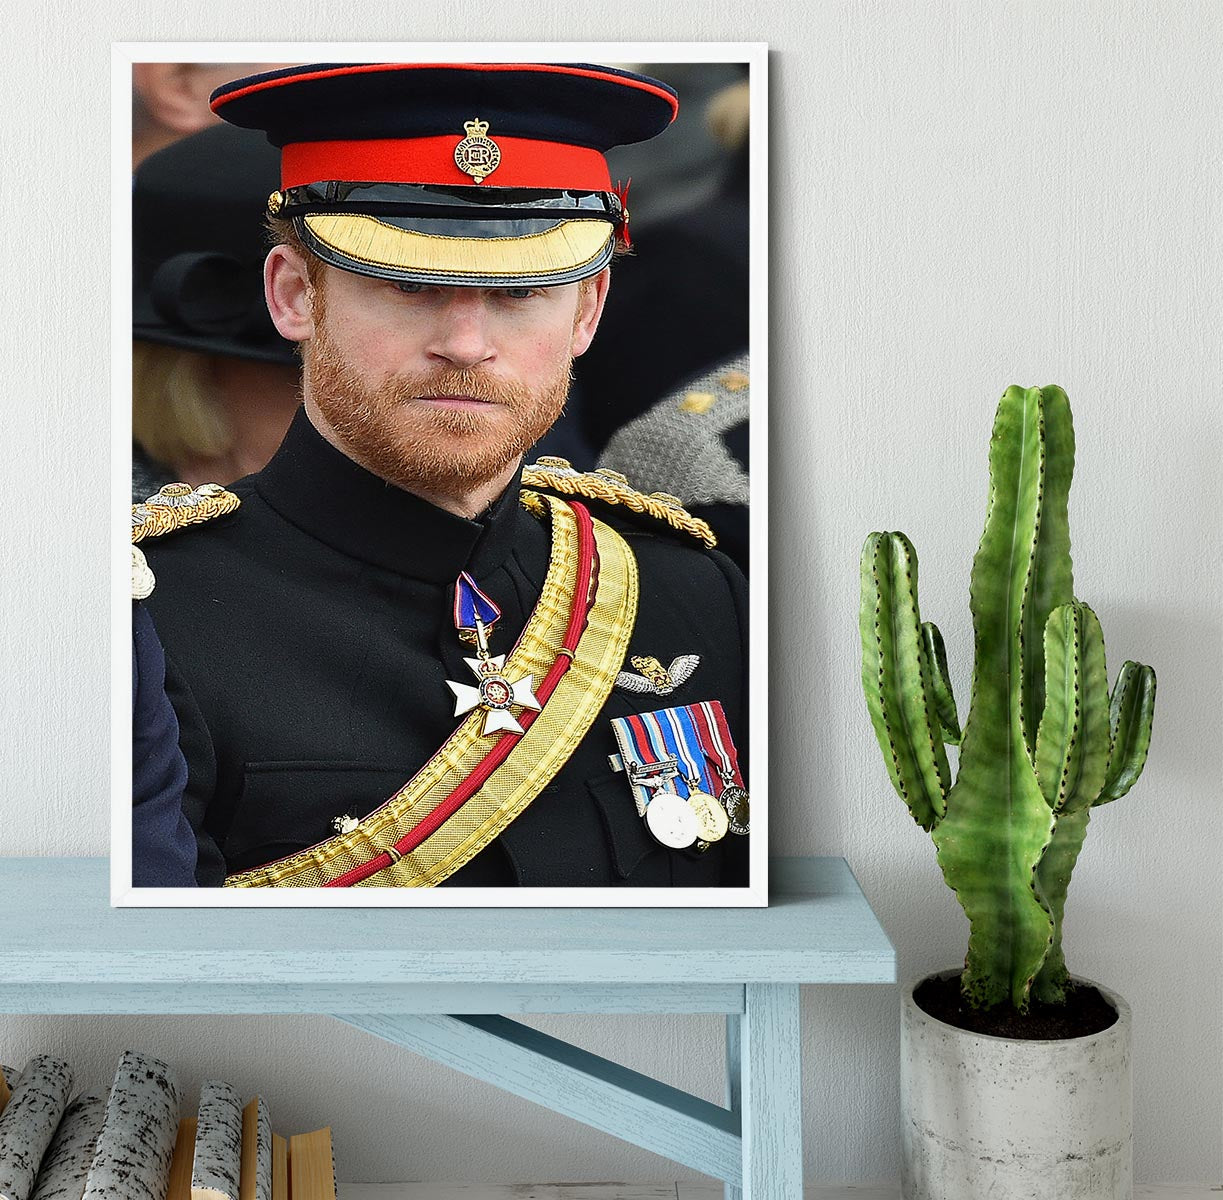 Prince Harry in uniform during ceremonies in Staffordshire Framed Print - Canvas Art Rocks -6